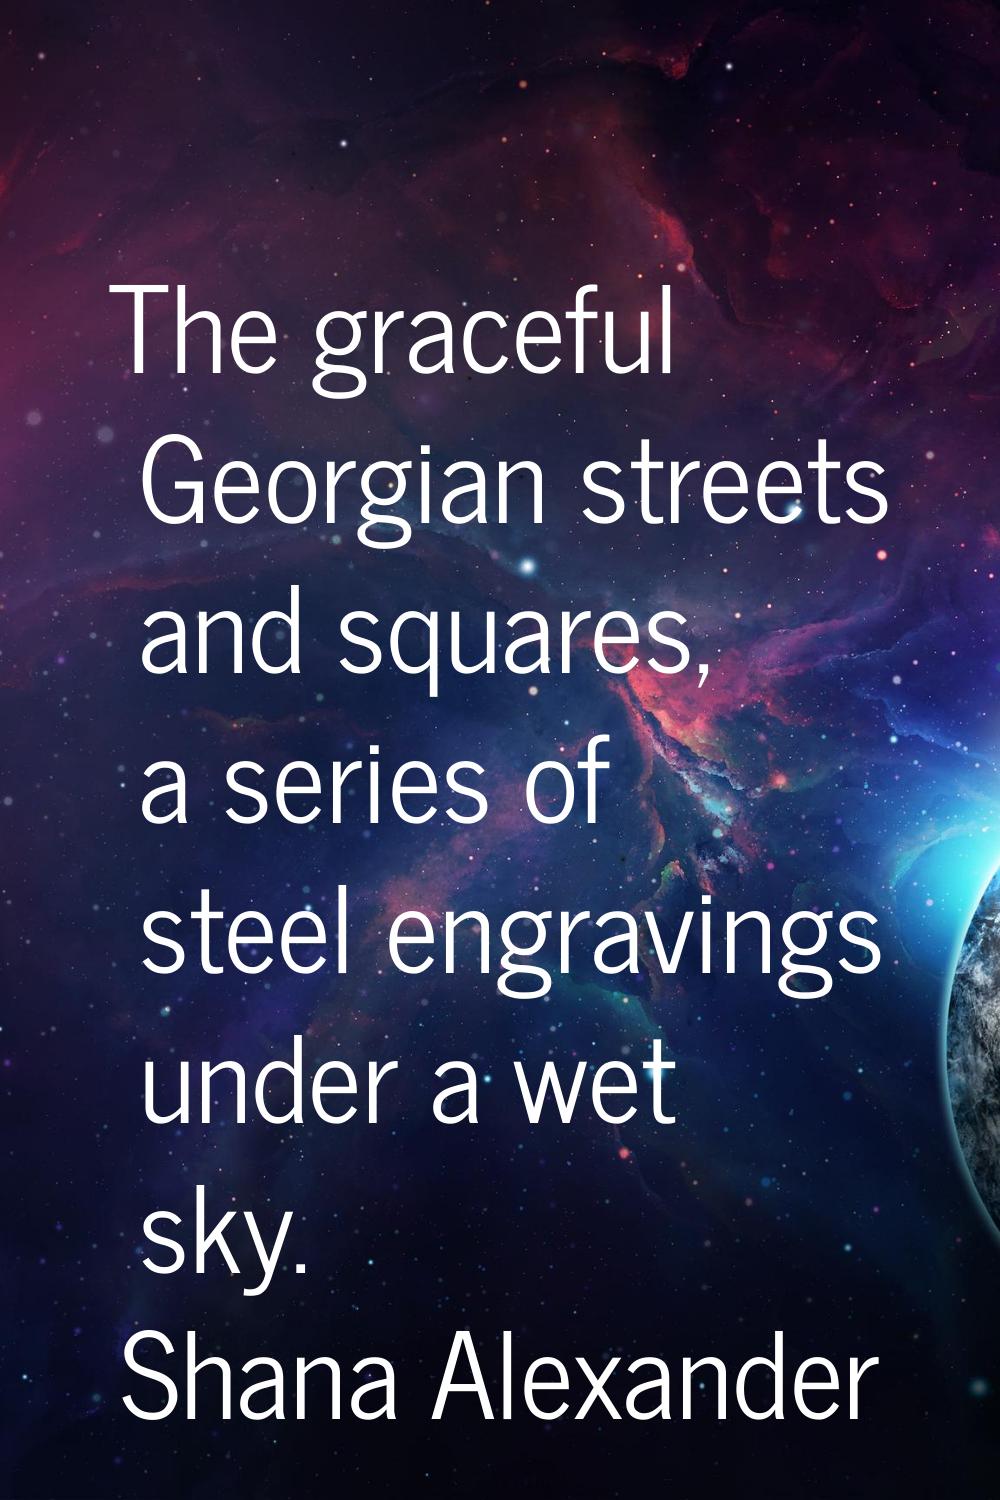 The graceful Georgian streets and squares, a series of steel engravings under a wet sky.